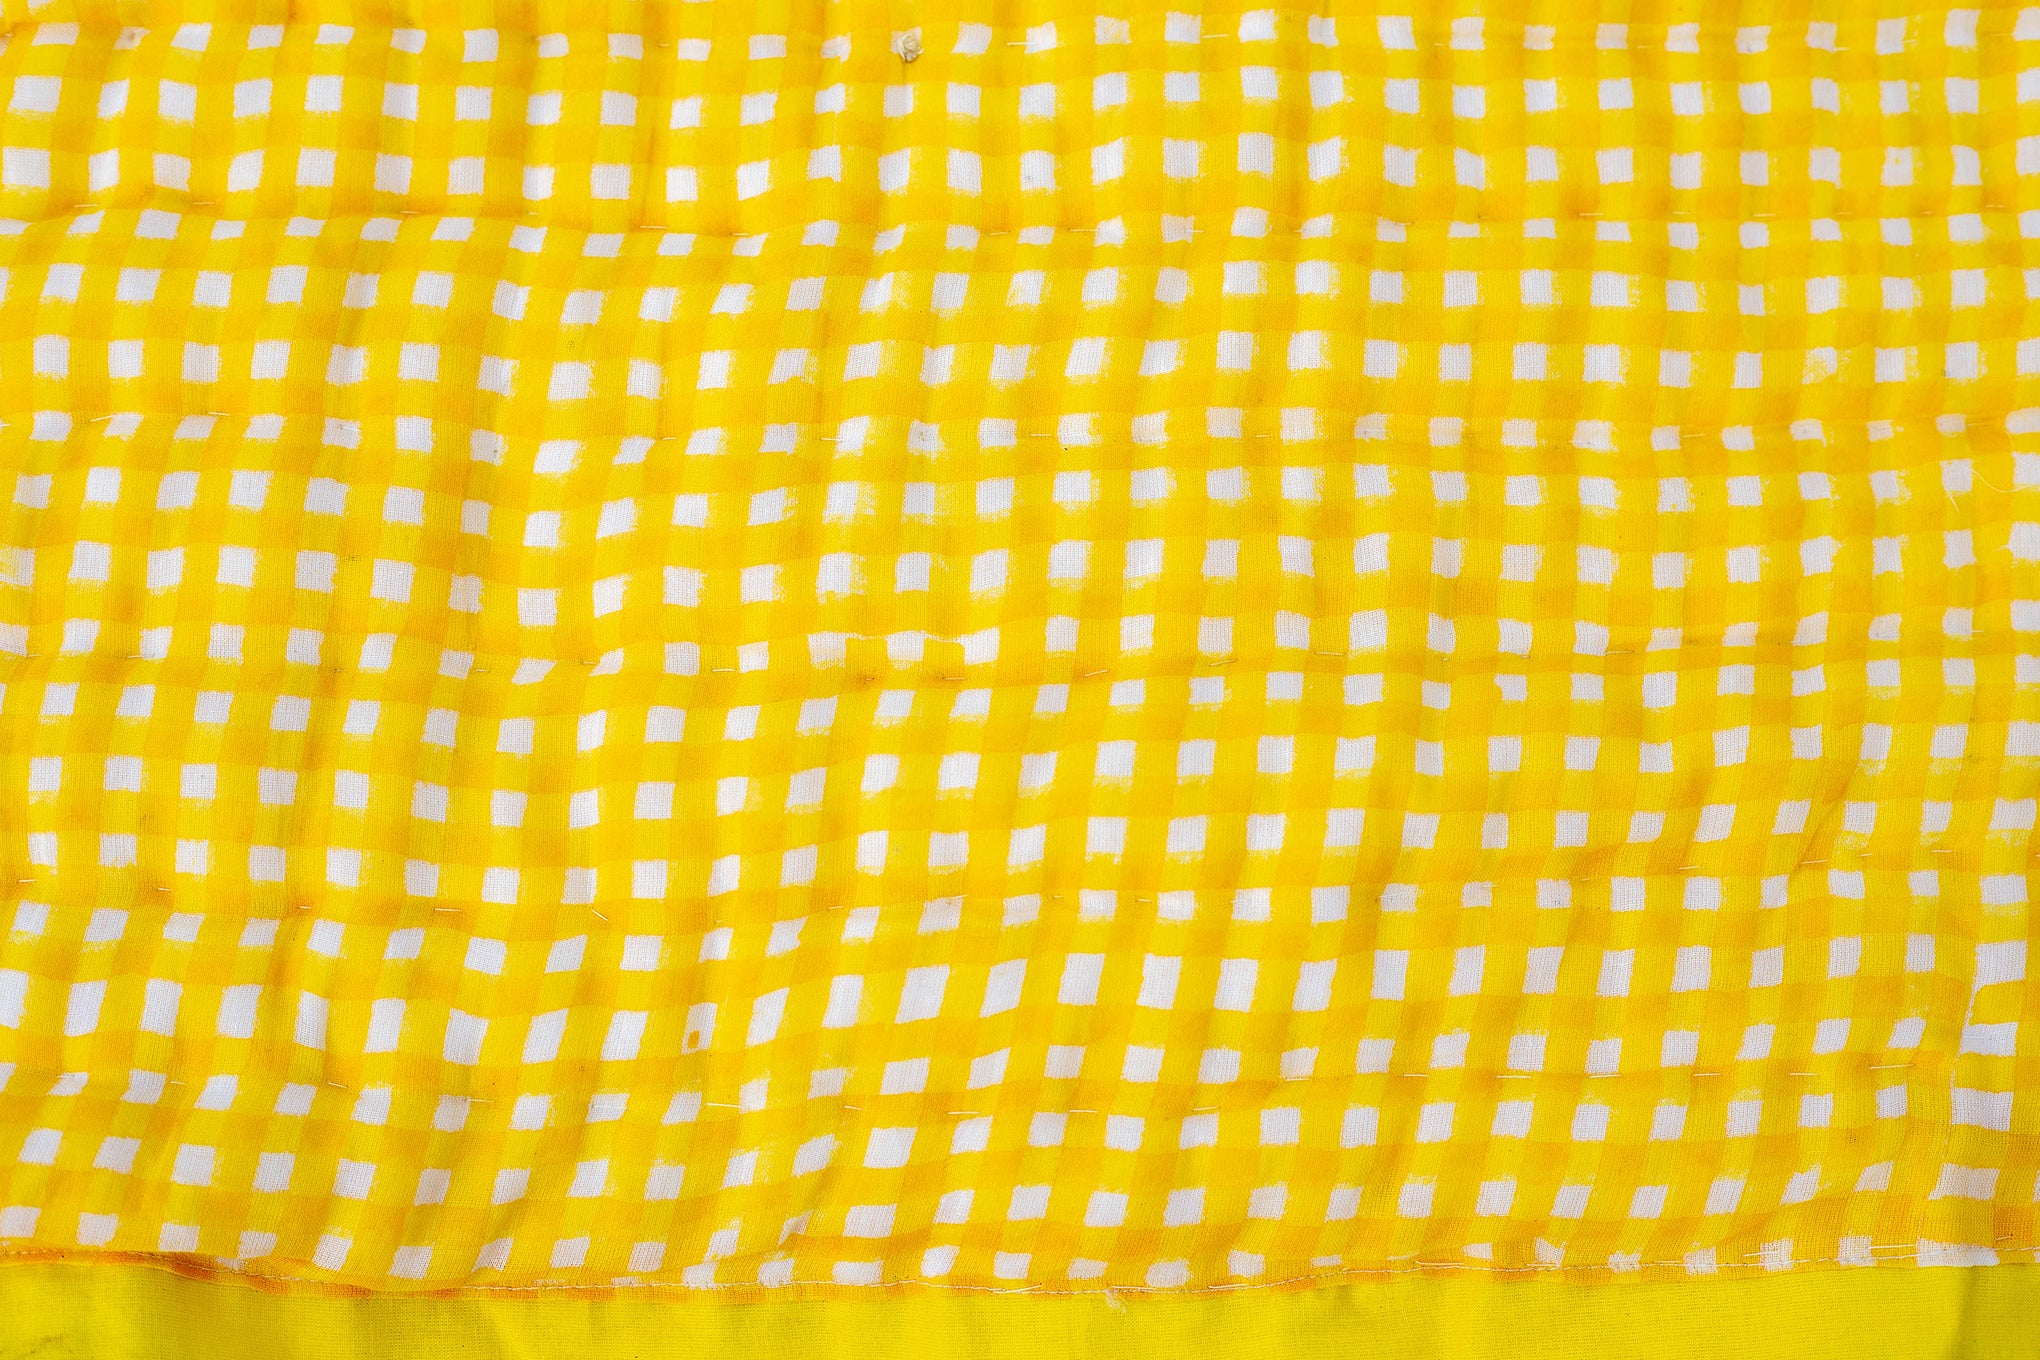 All New Roysha 2021 Queen Quilt Collection,100 Percent Handmade, Hand Block printed Quilt, Jaipuri Quilt, Hand Quilted, Yellow Checks